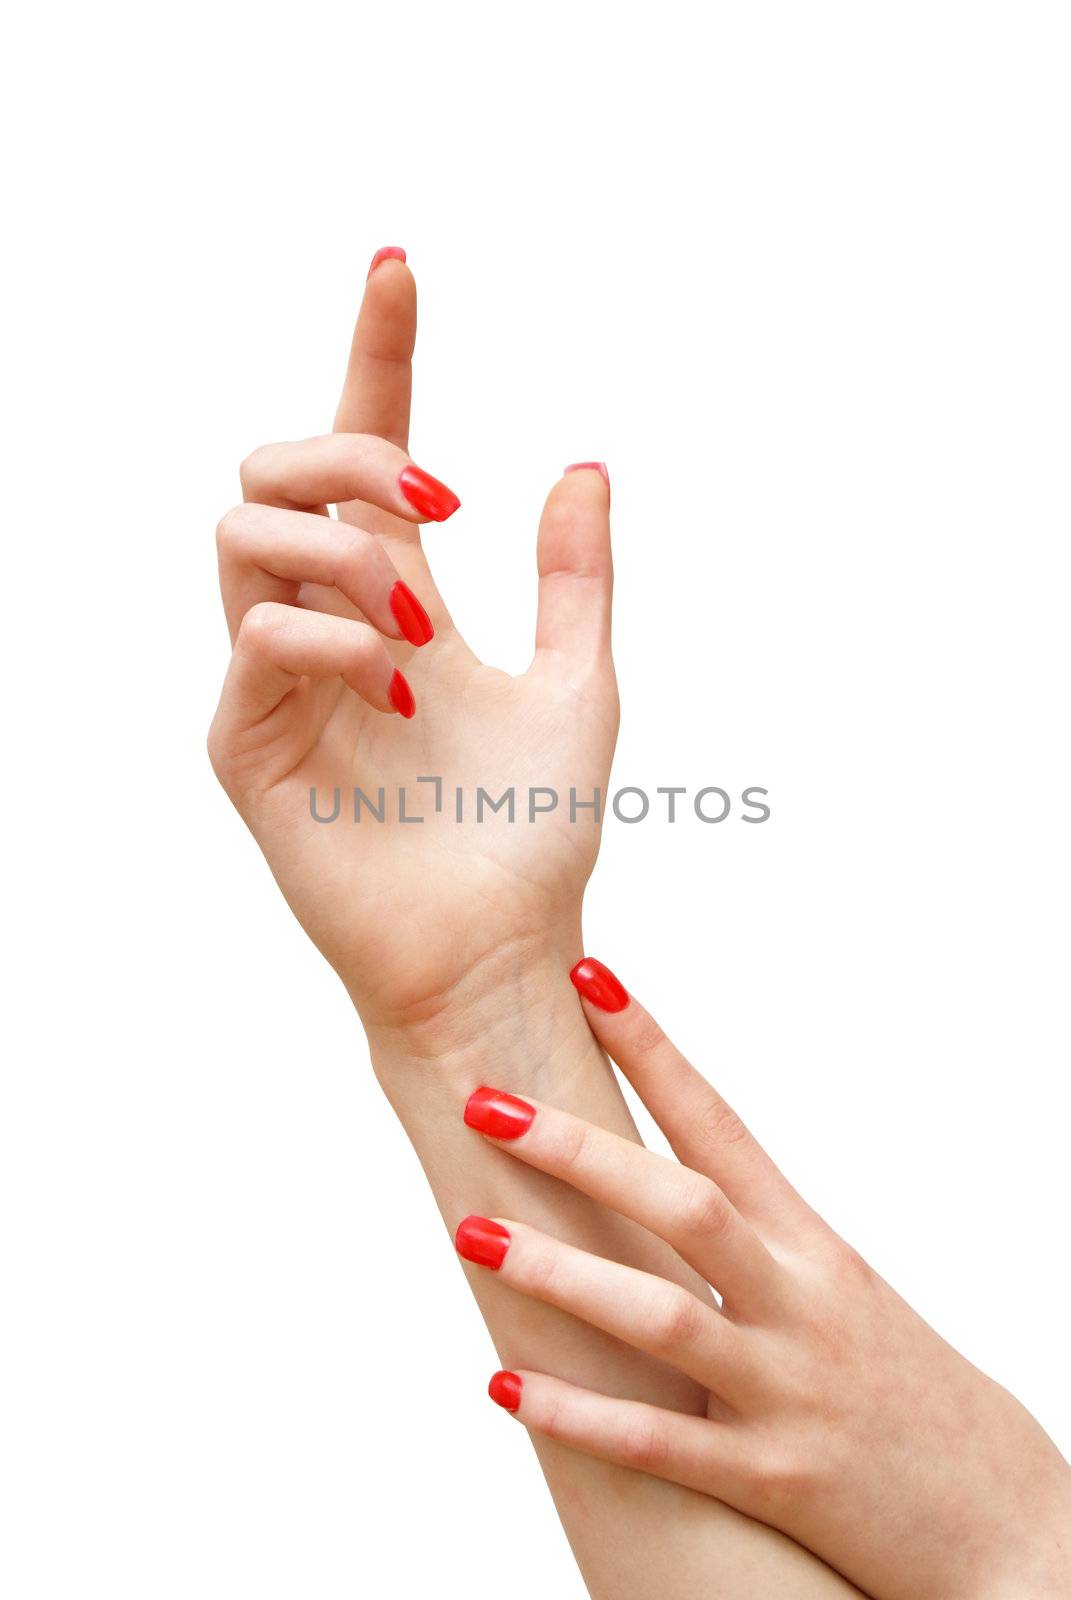 A girl shows off her new nails in a manicure pose.